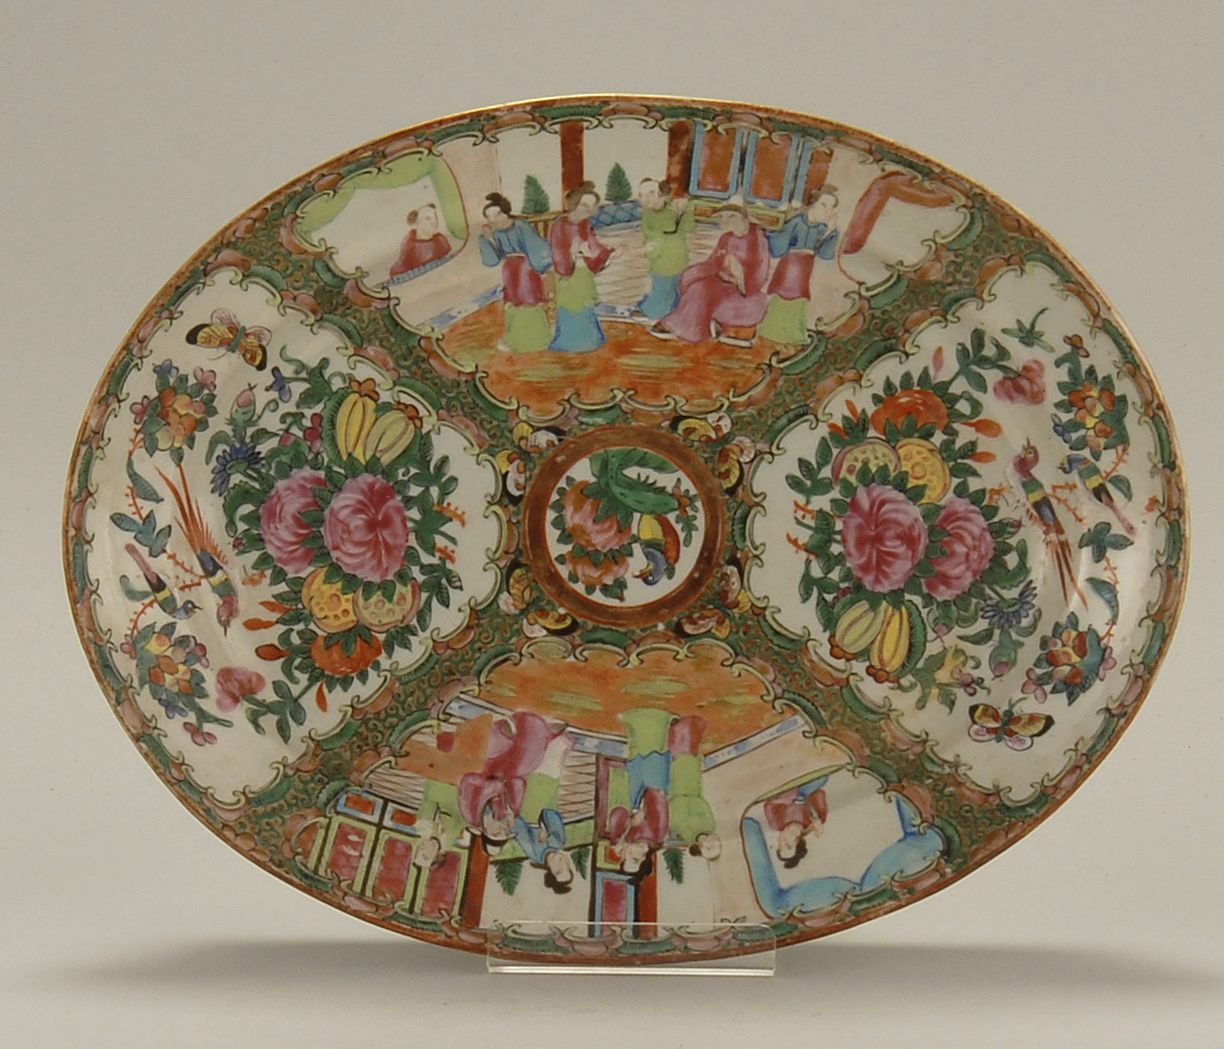 OVAL CHINESE EXPORT ROSE MEDALLION